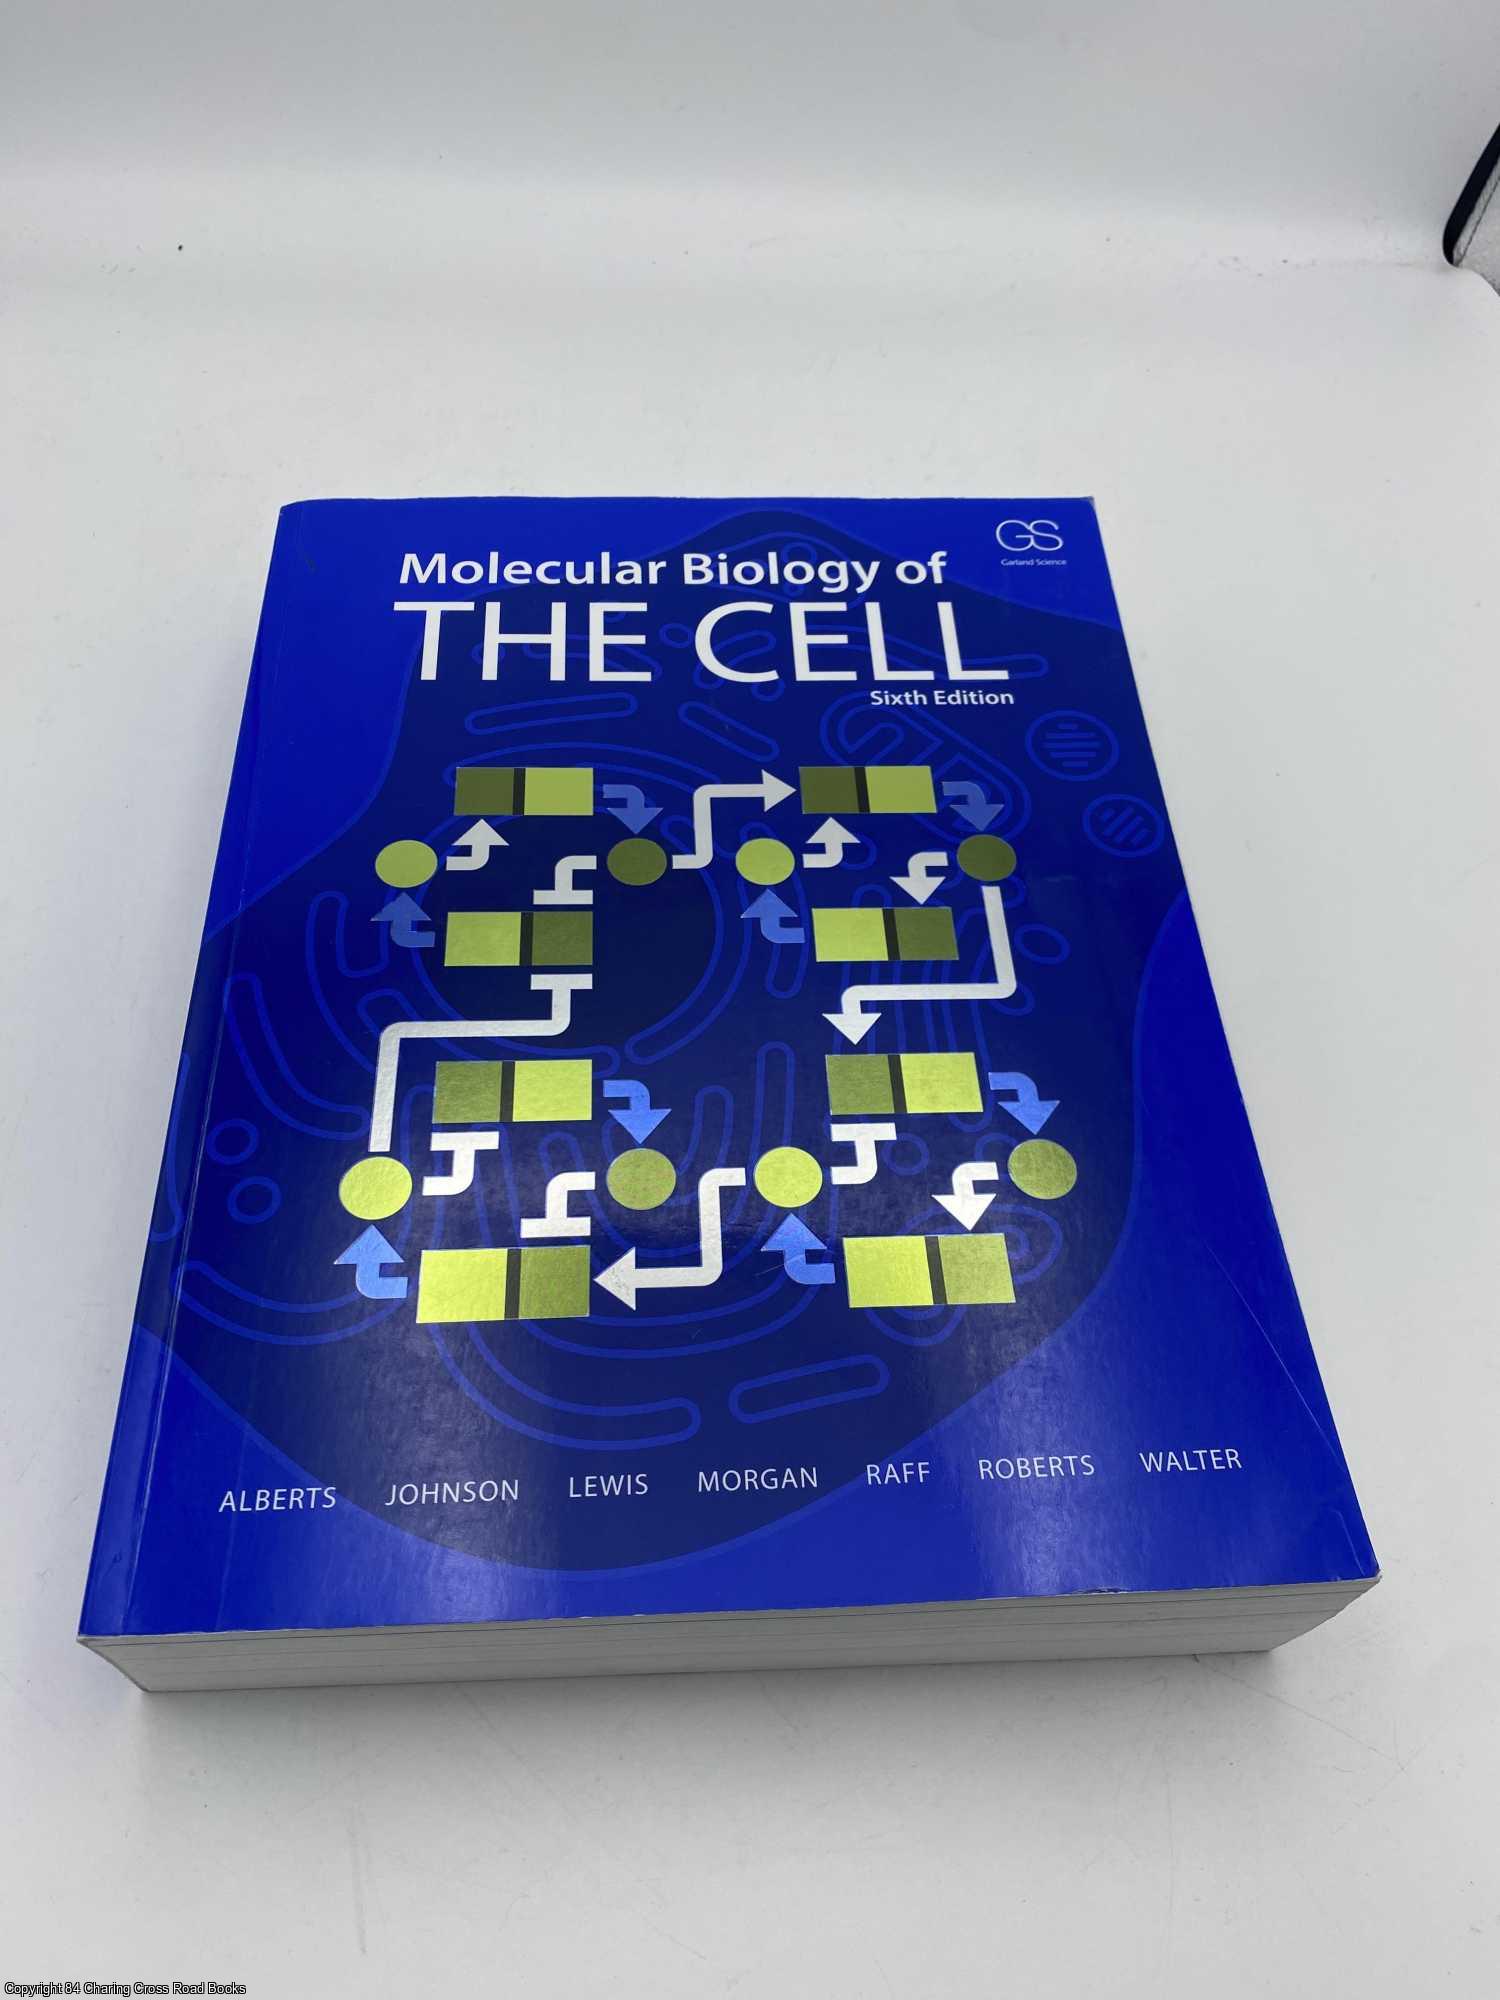 Molecular Biology of the Cell 6th edition by Bruce Alberts on 84 Charing  Cross Rare Books